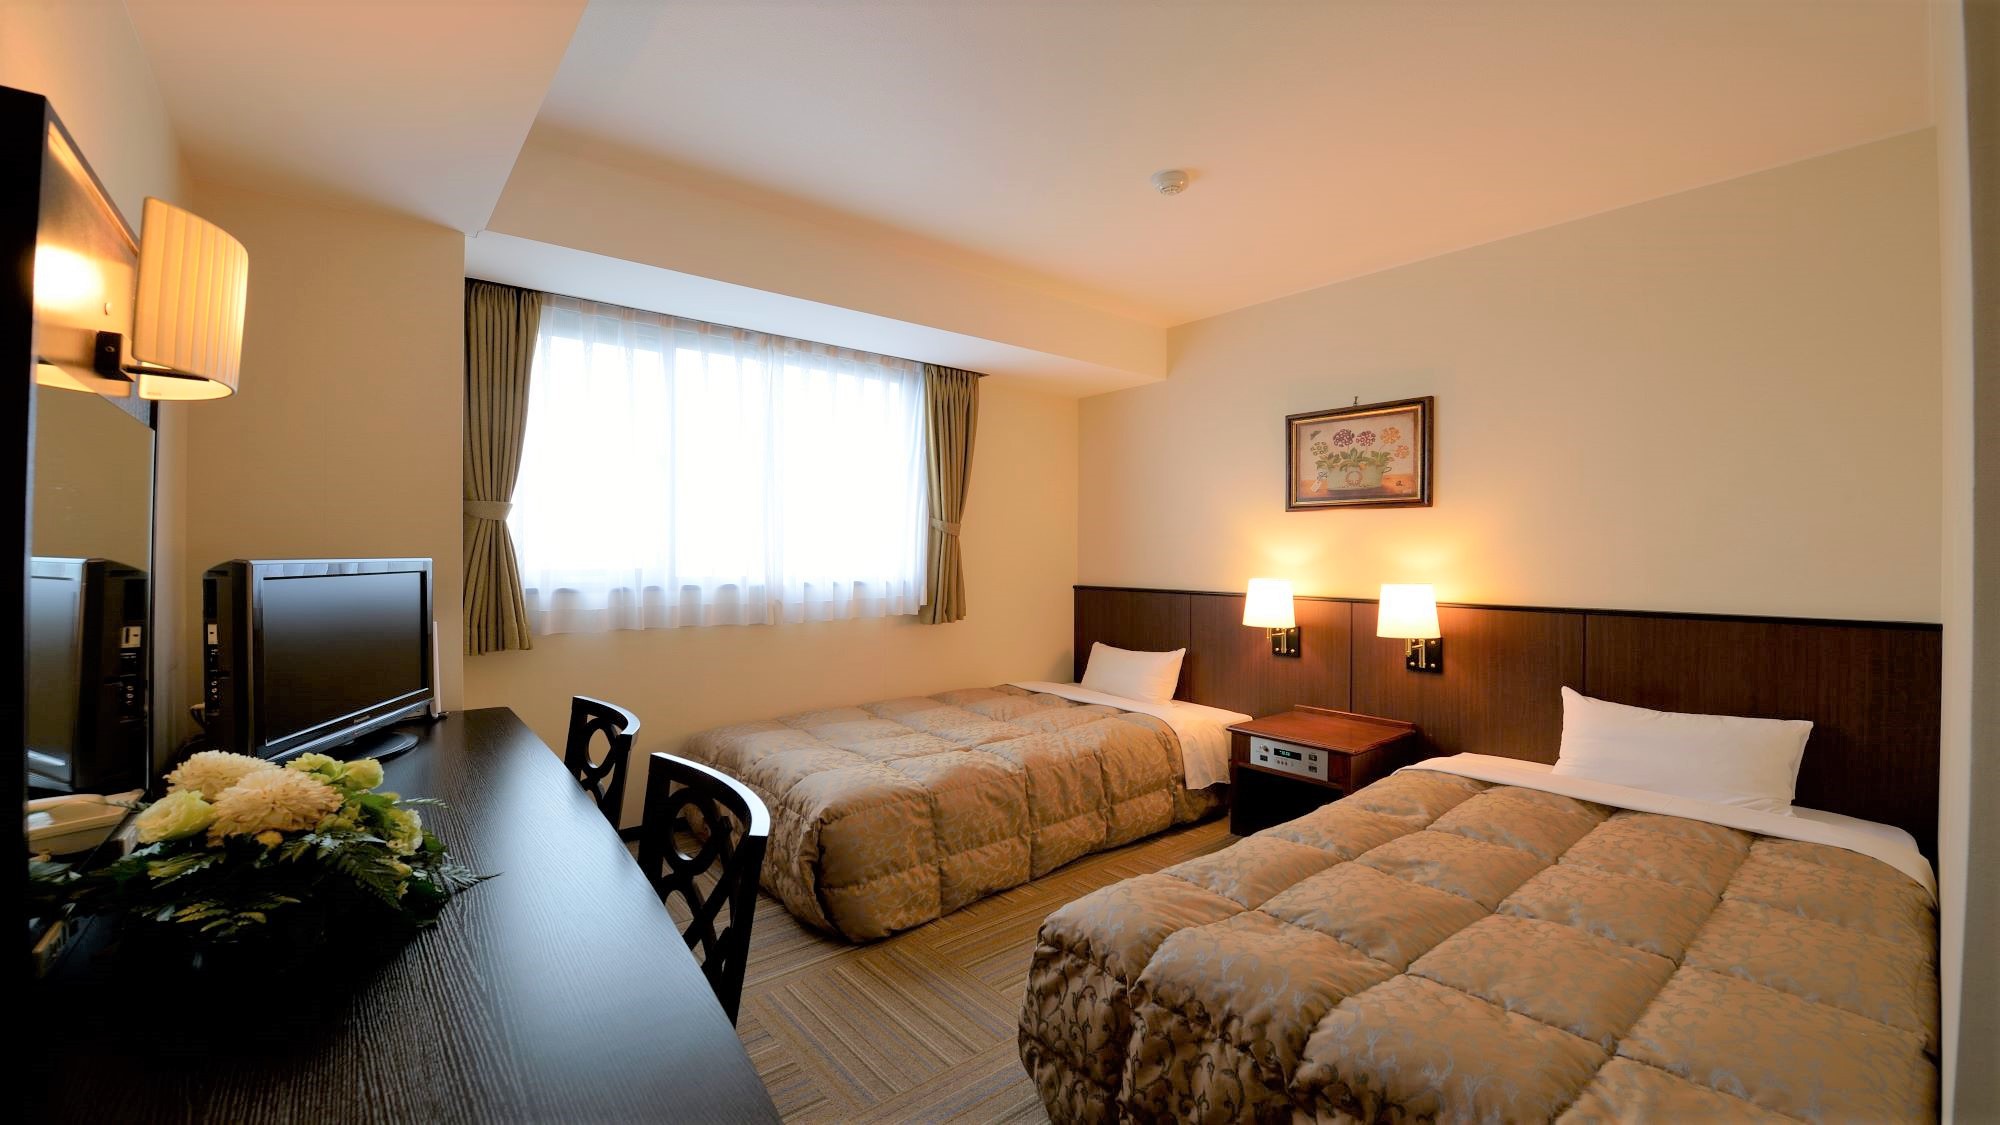 Hotel Gen Hamamatsu Inter Hotel Gen Hamamatsu Inter is a popular choice amongst travelers in Hamamatsu, whether exploring or just passing through. The property offers guests a range of services and amenities designed to provid